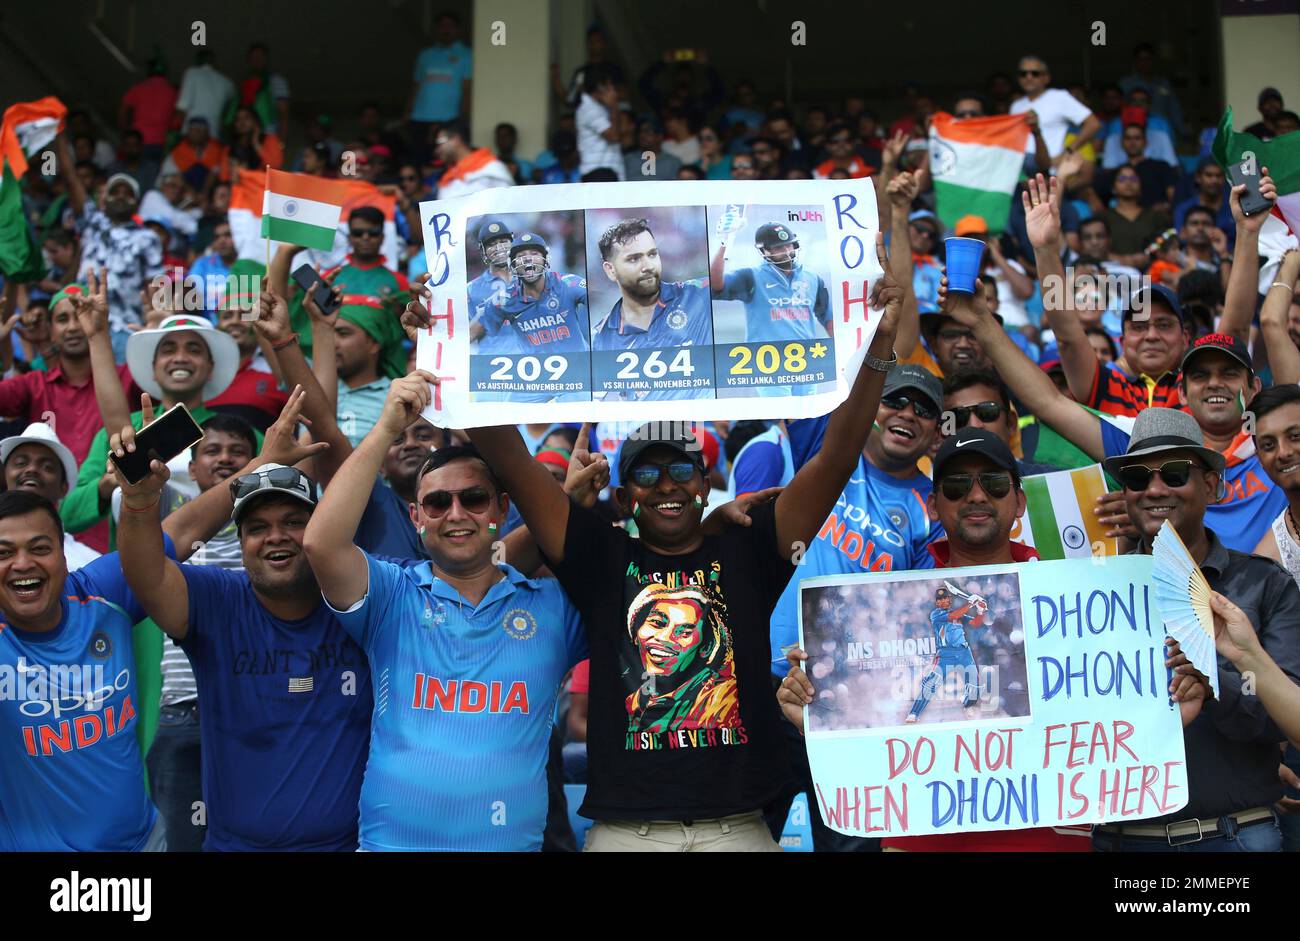 Indian supporters some of them holding placards cheer for their team before  the start of the final one day international cricket match of Asia Cup  between India and Bangladesh in Dubai, United